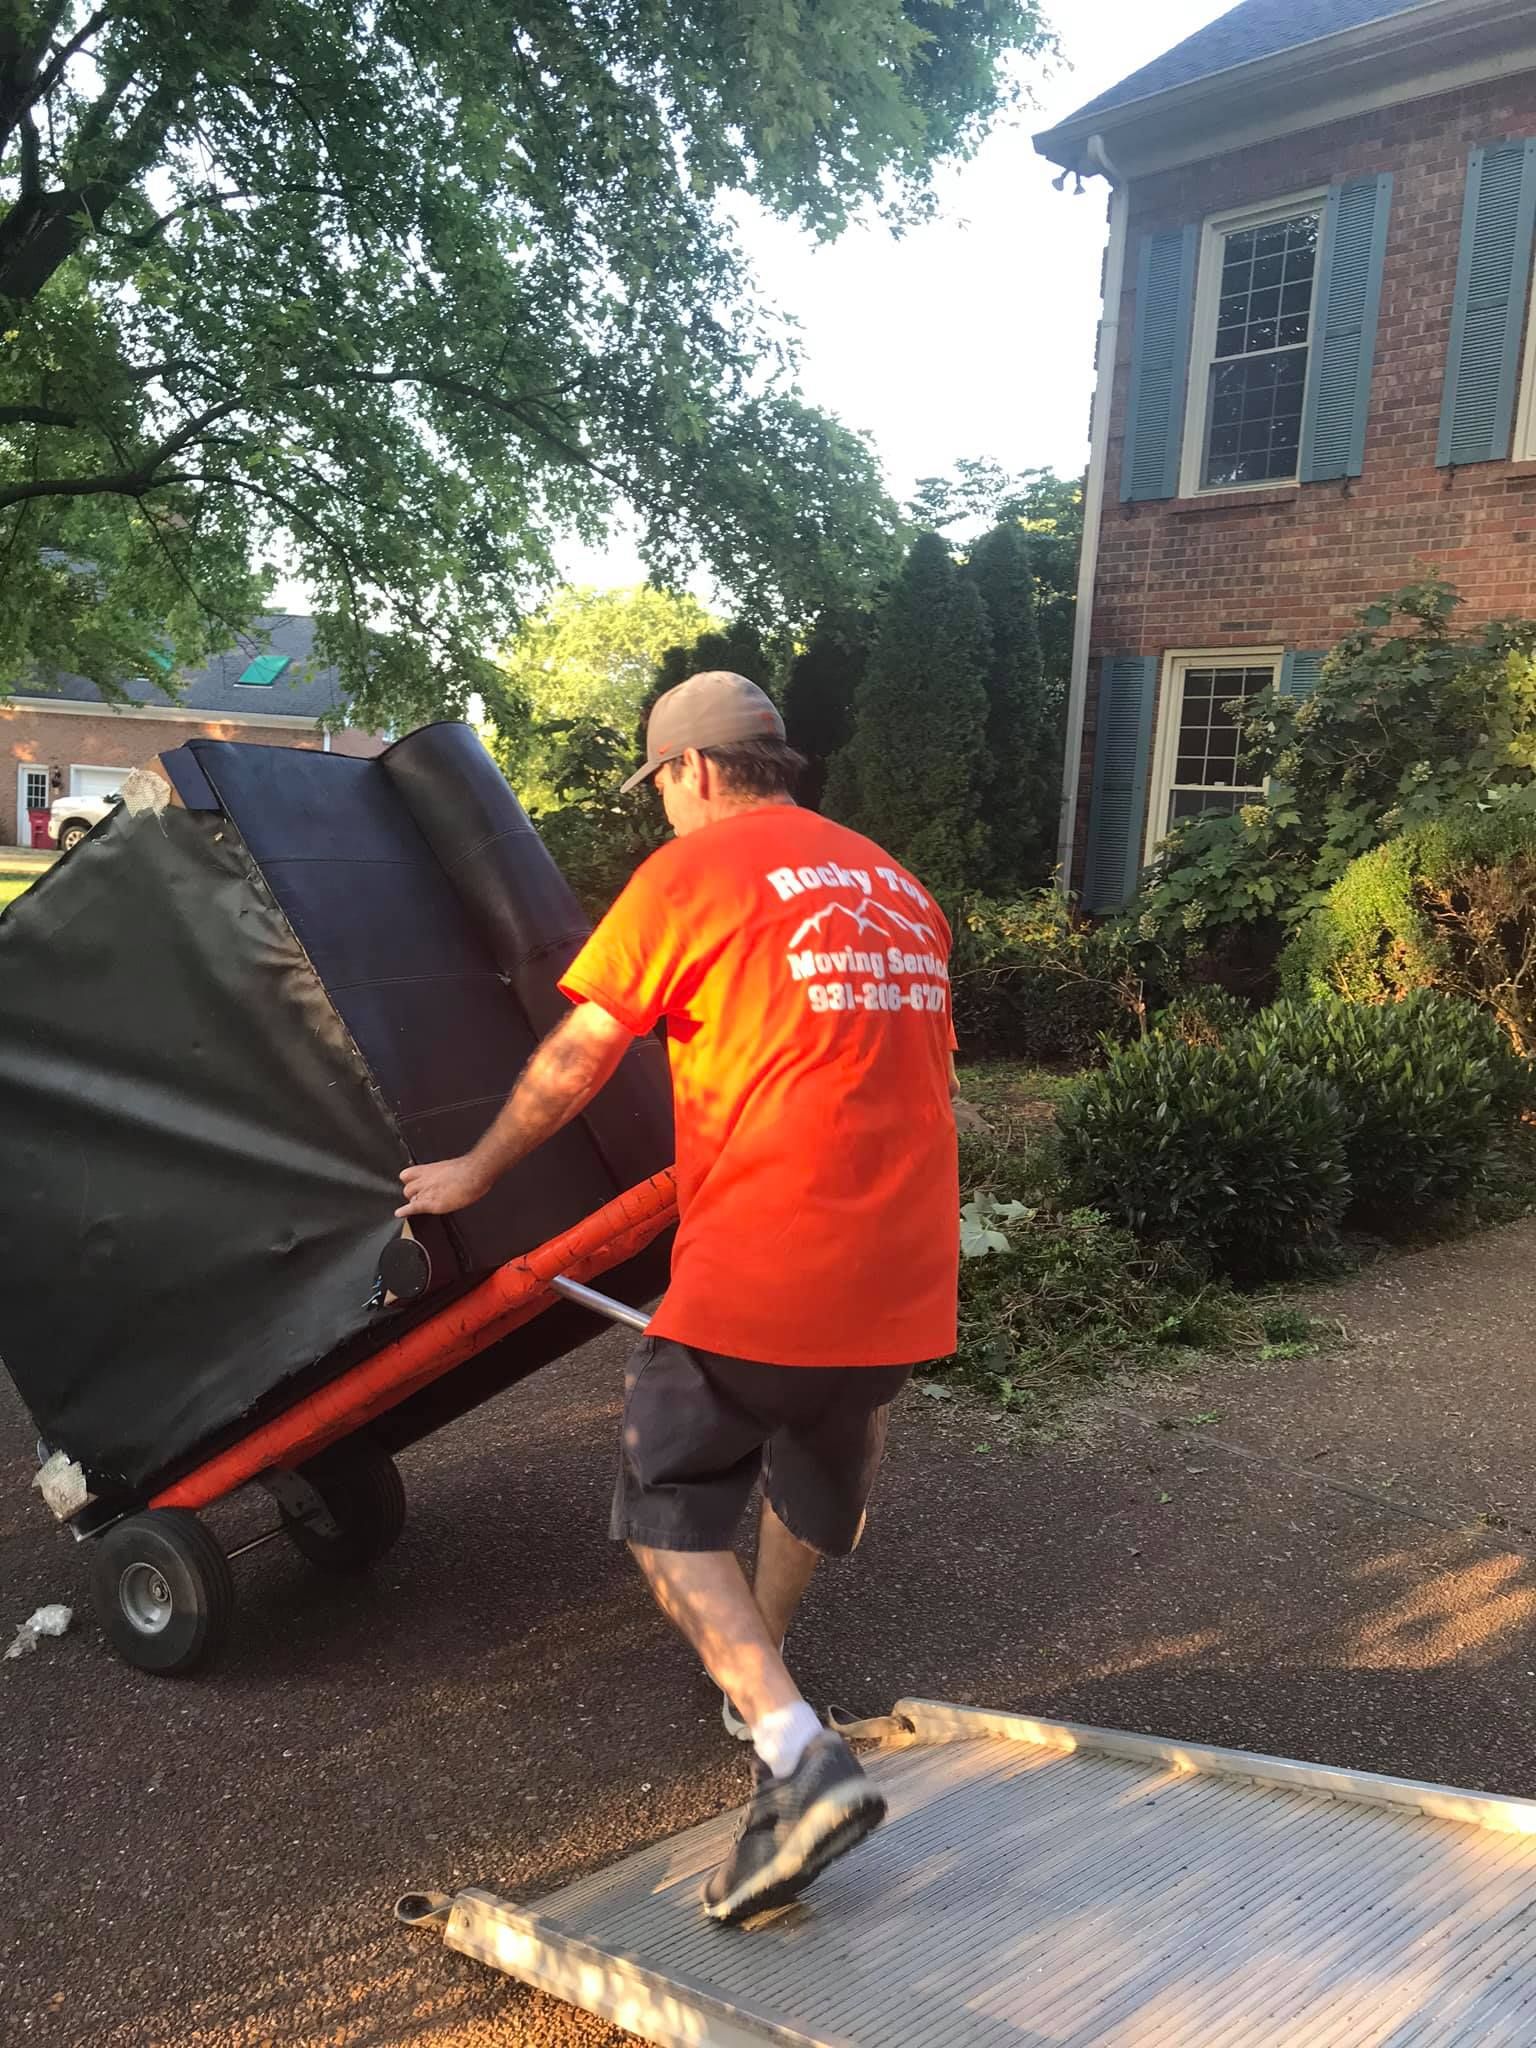 If you are moving homes we help to take the stress away of worrying about your belongings and furniture. We can take care of packing and unpacking so your move is a breeze. for Rocky Top Moving Service in Clarksville, TN